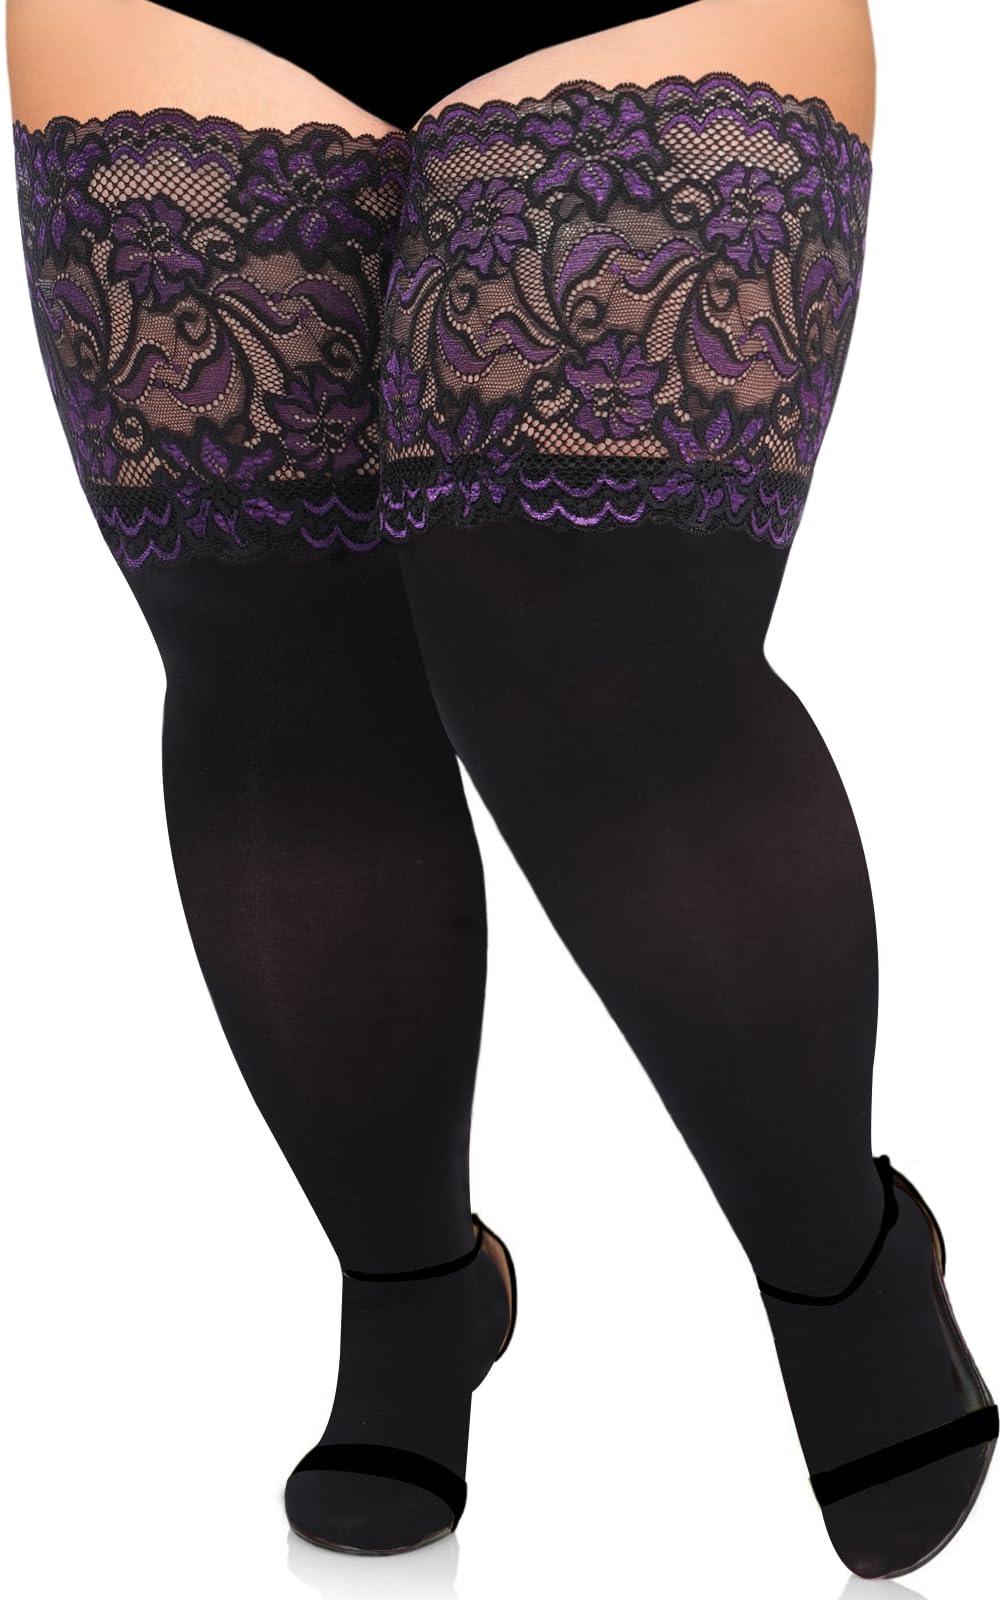 55D Semi Sheer 6.88IN Silicone Lace Top Stay Up Thigh High-Black & Purple - Moon Wood